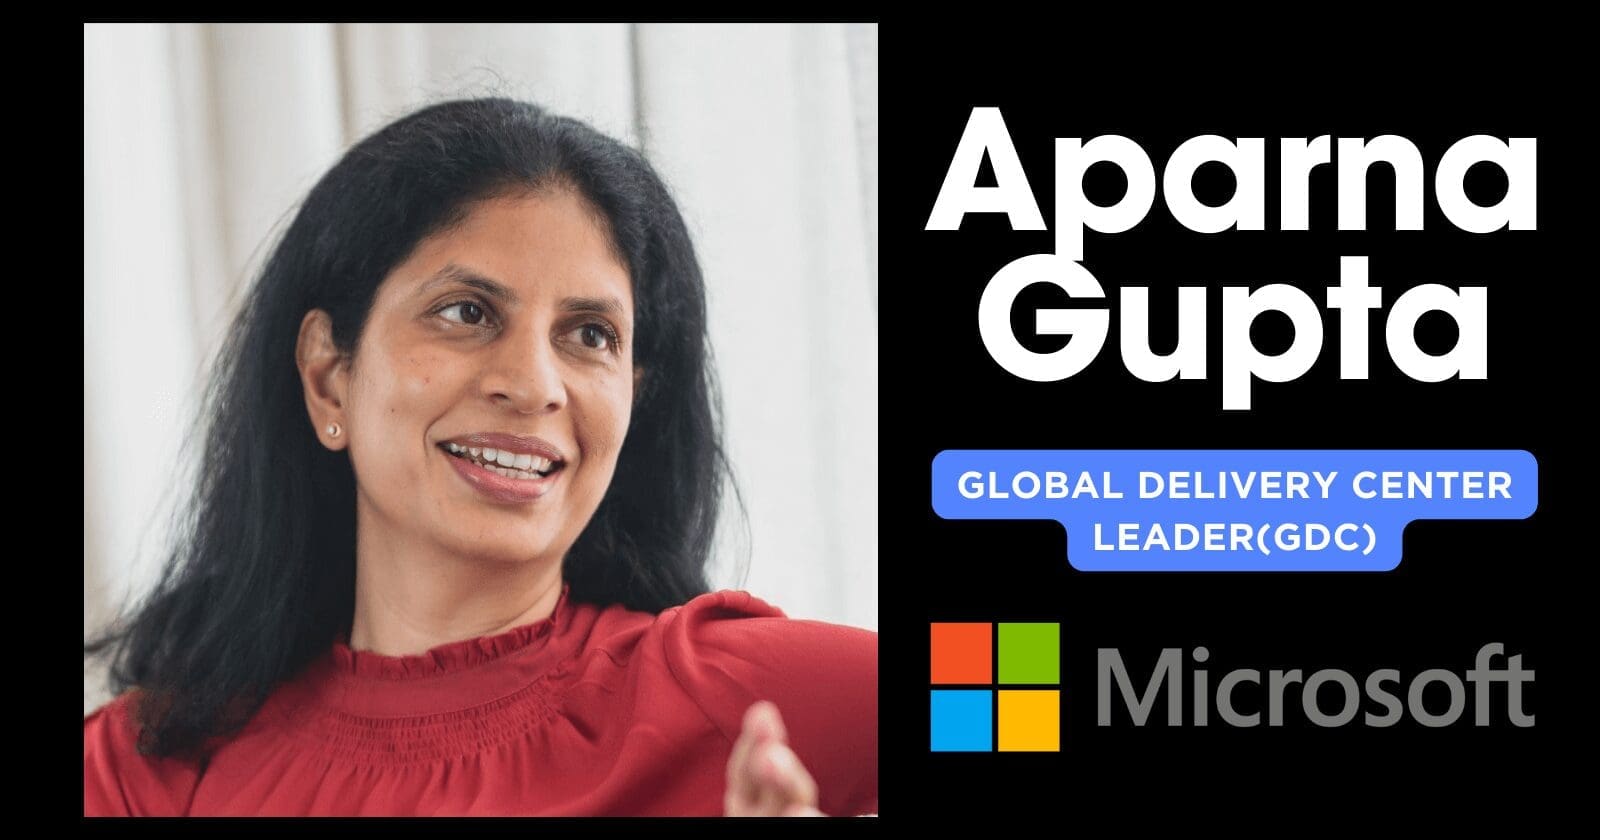 empowering-excellence-aparna-gupta-takes-the-helm-as-microsofts-global-delivery-center-leader